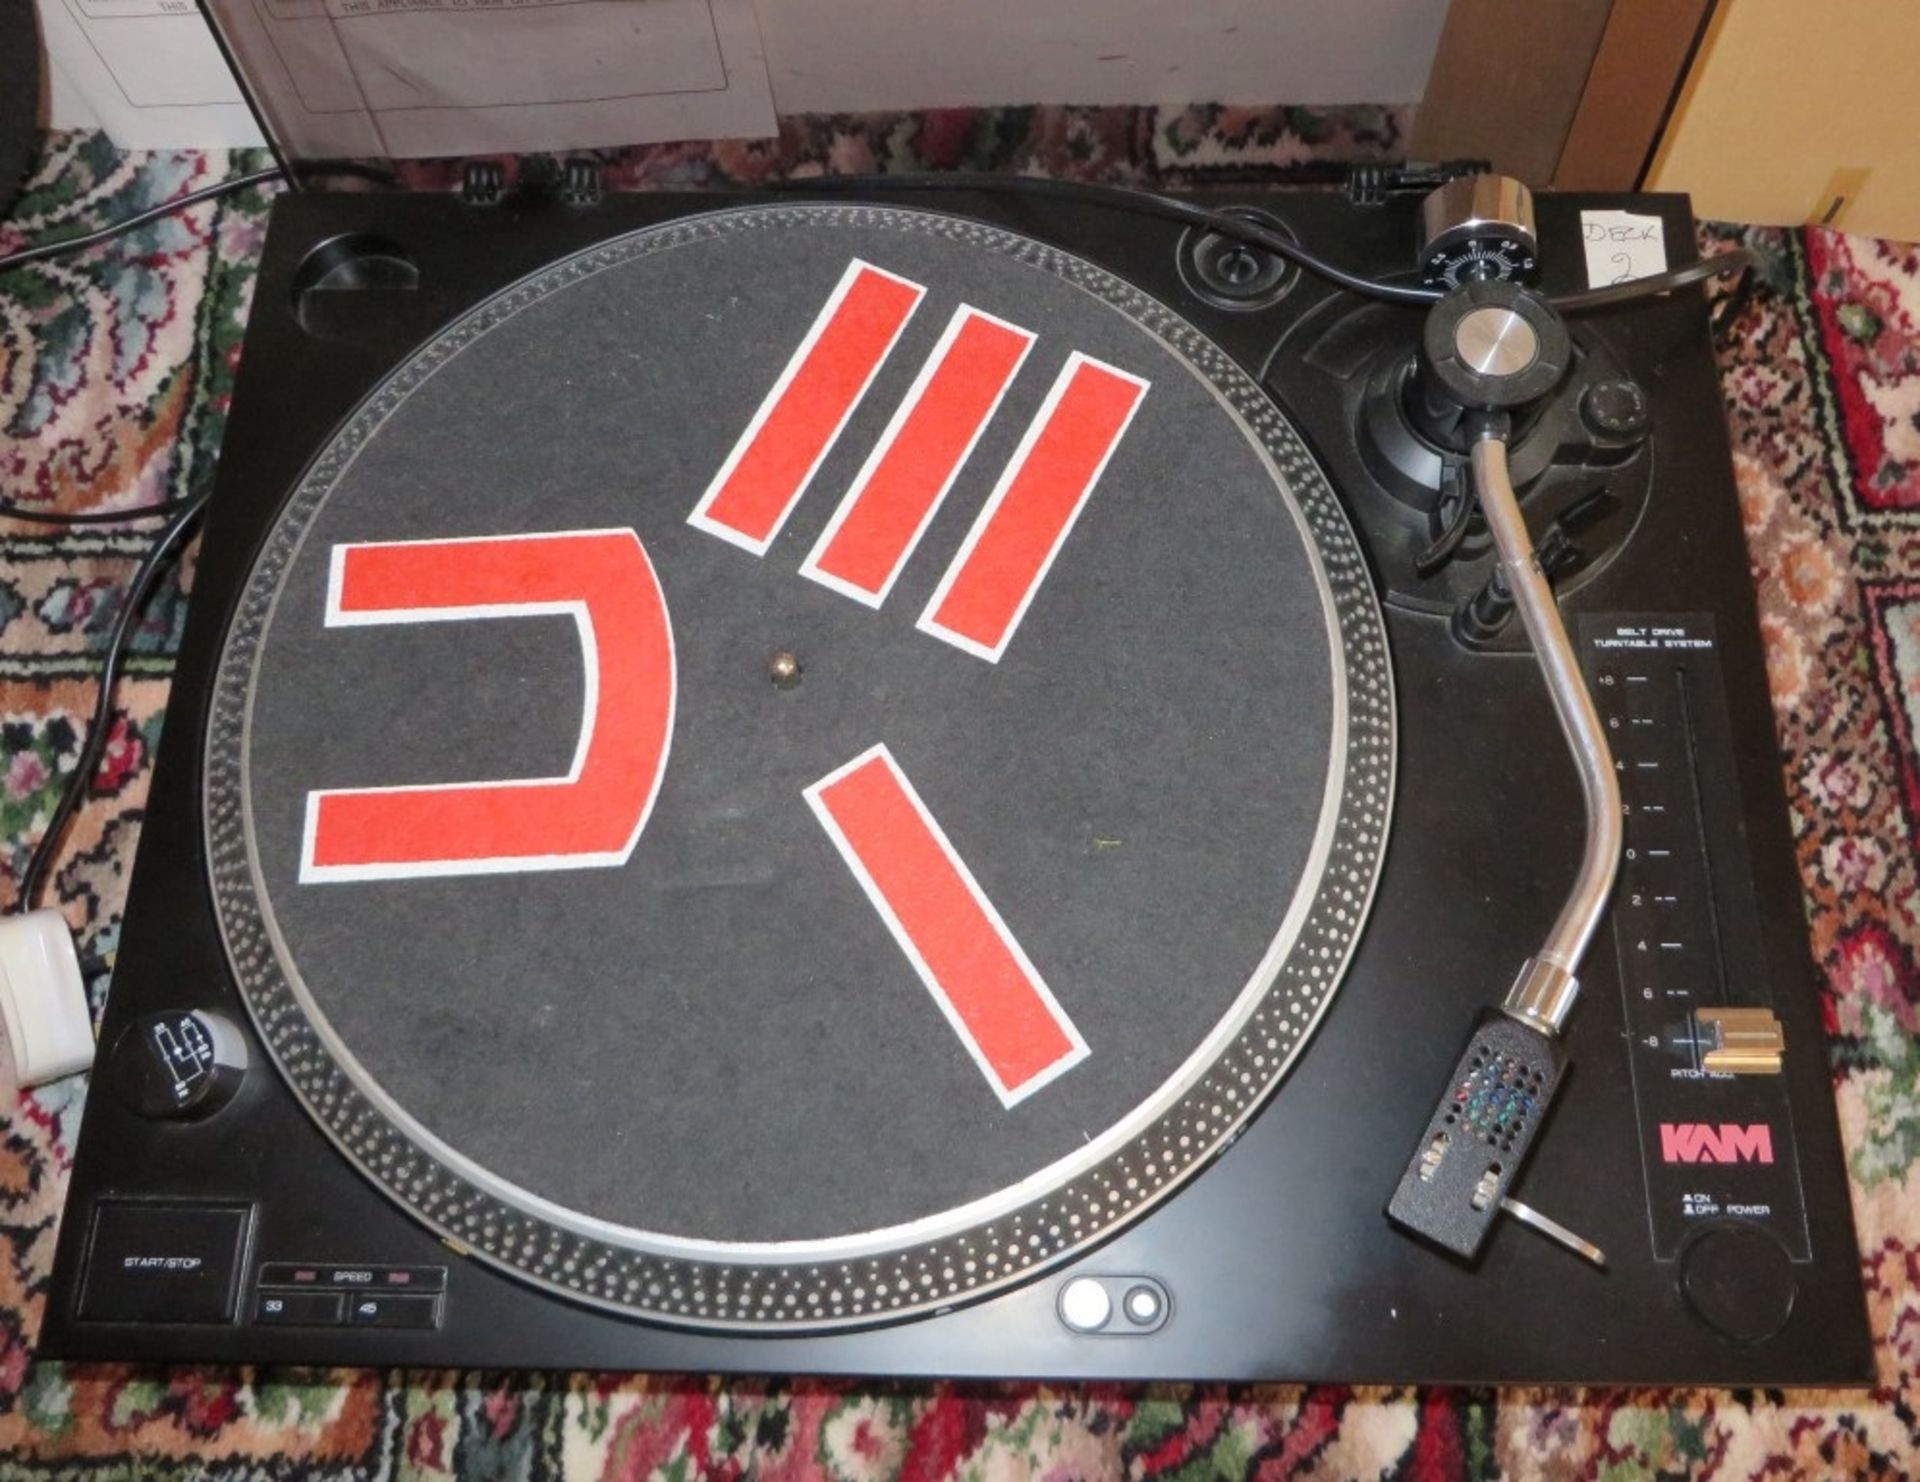 A Pair Of KAM Branded Full Manual Belt Drive Turntables / Decks - Both Preowned In Working Condition - Image 3 of 5